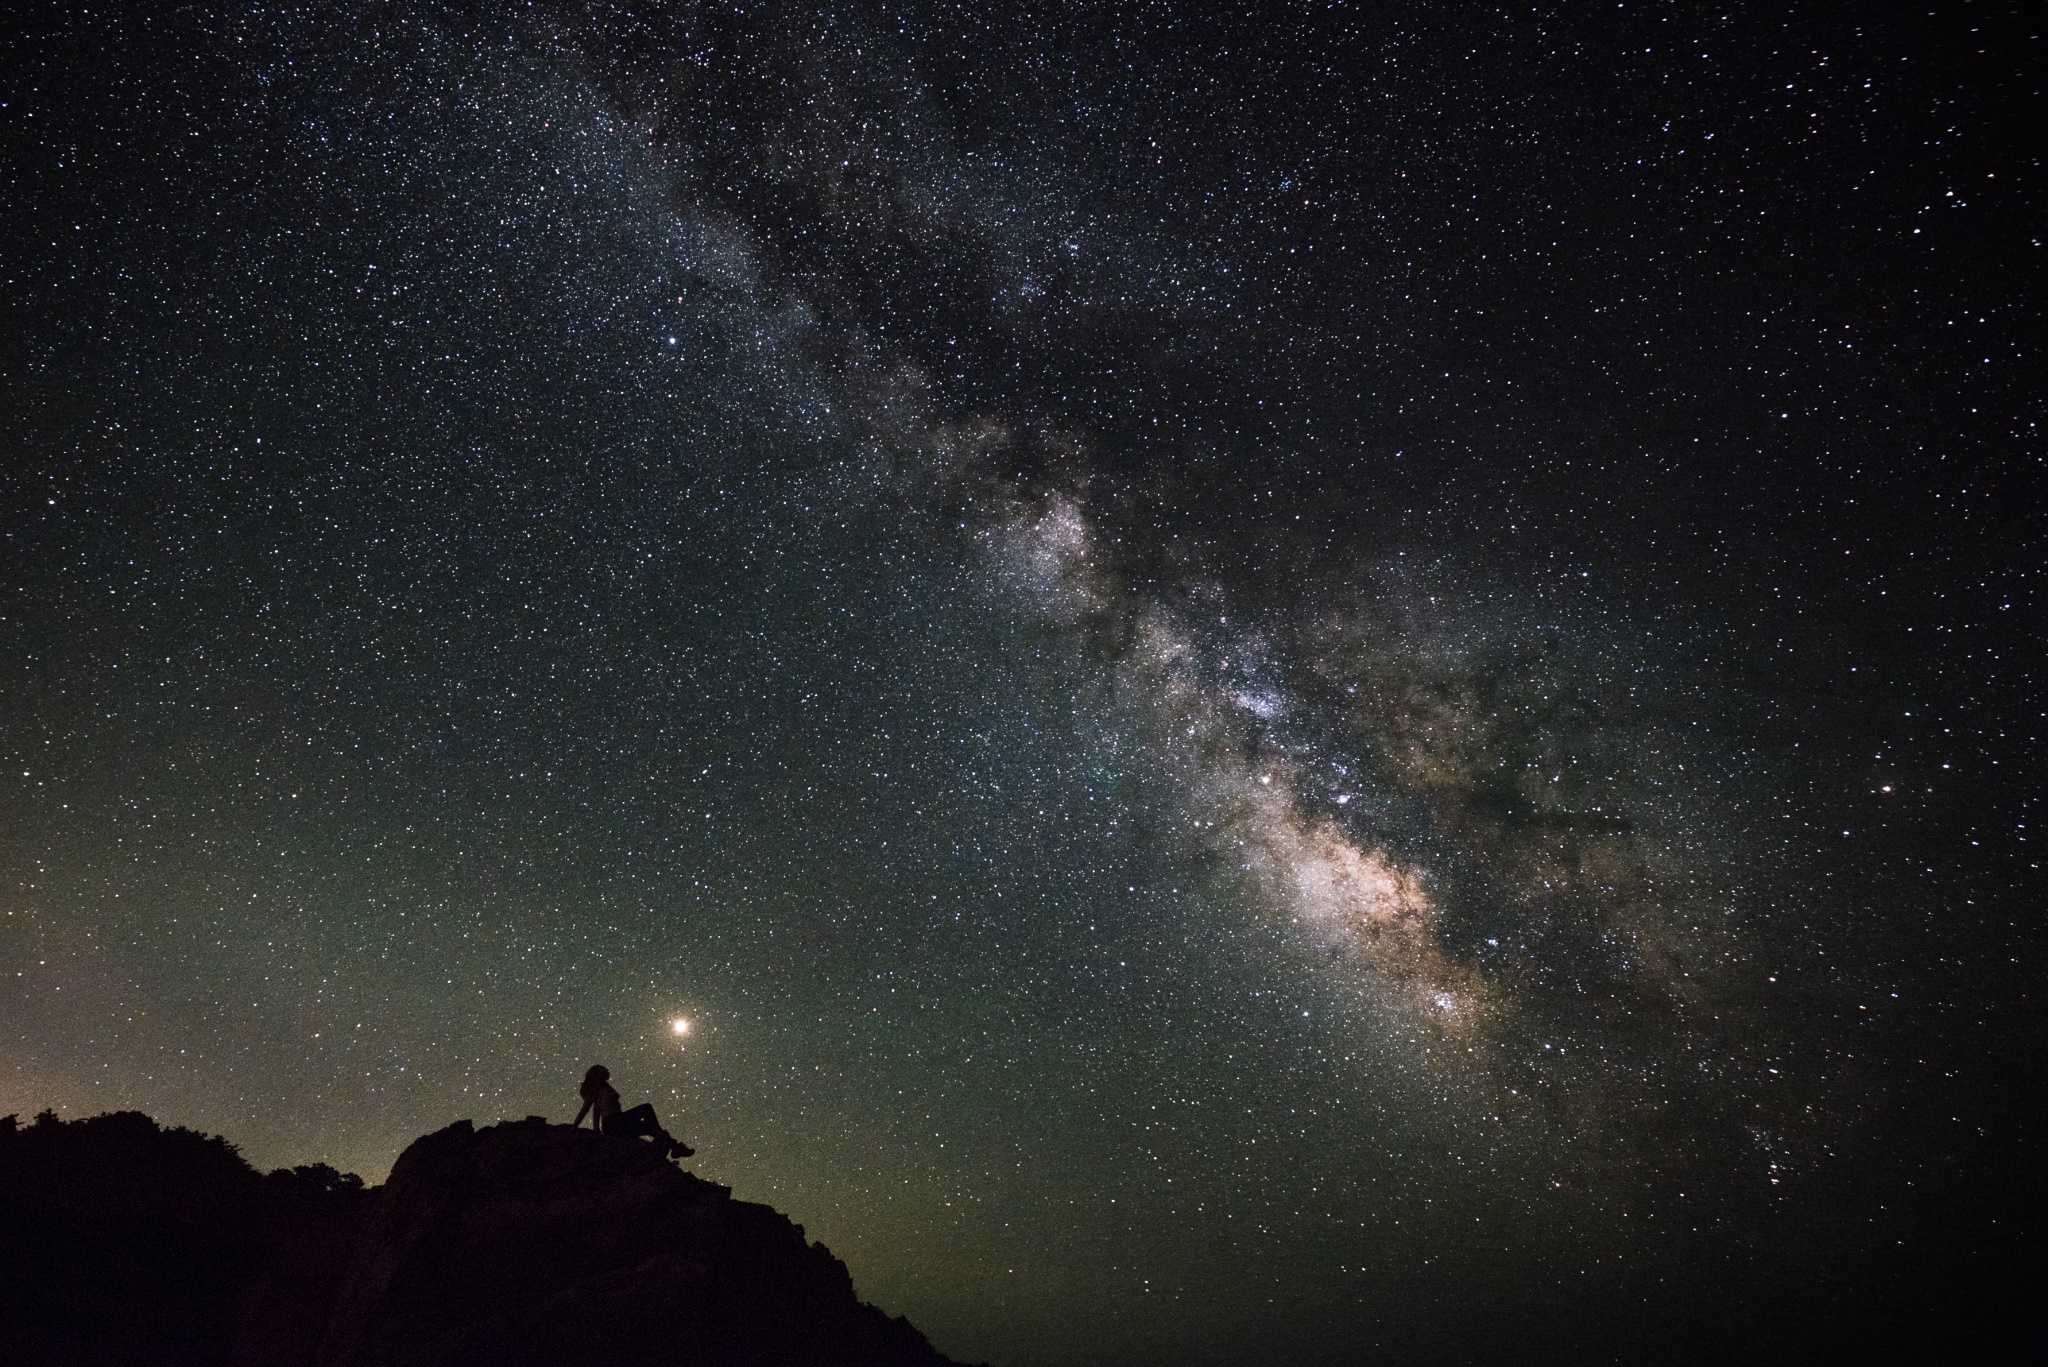 The Milky Way galaxy and Mars sit behind a person sitting on a rock in silhouette.